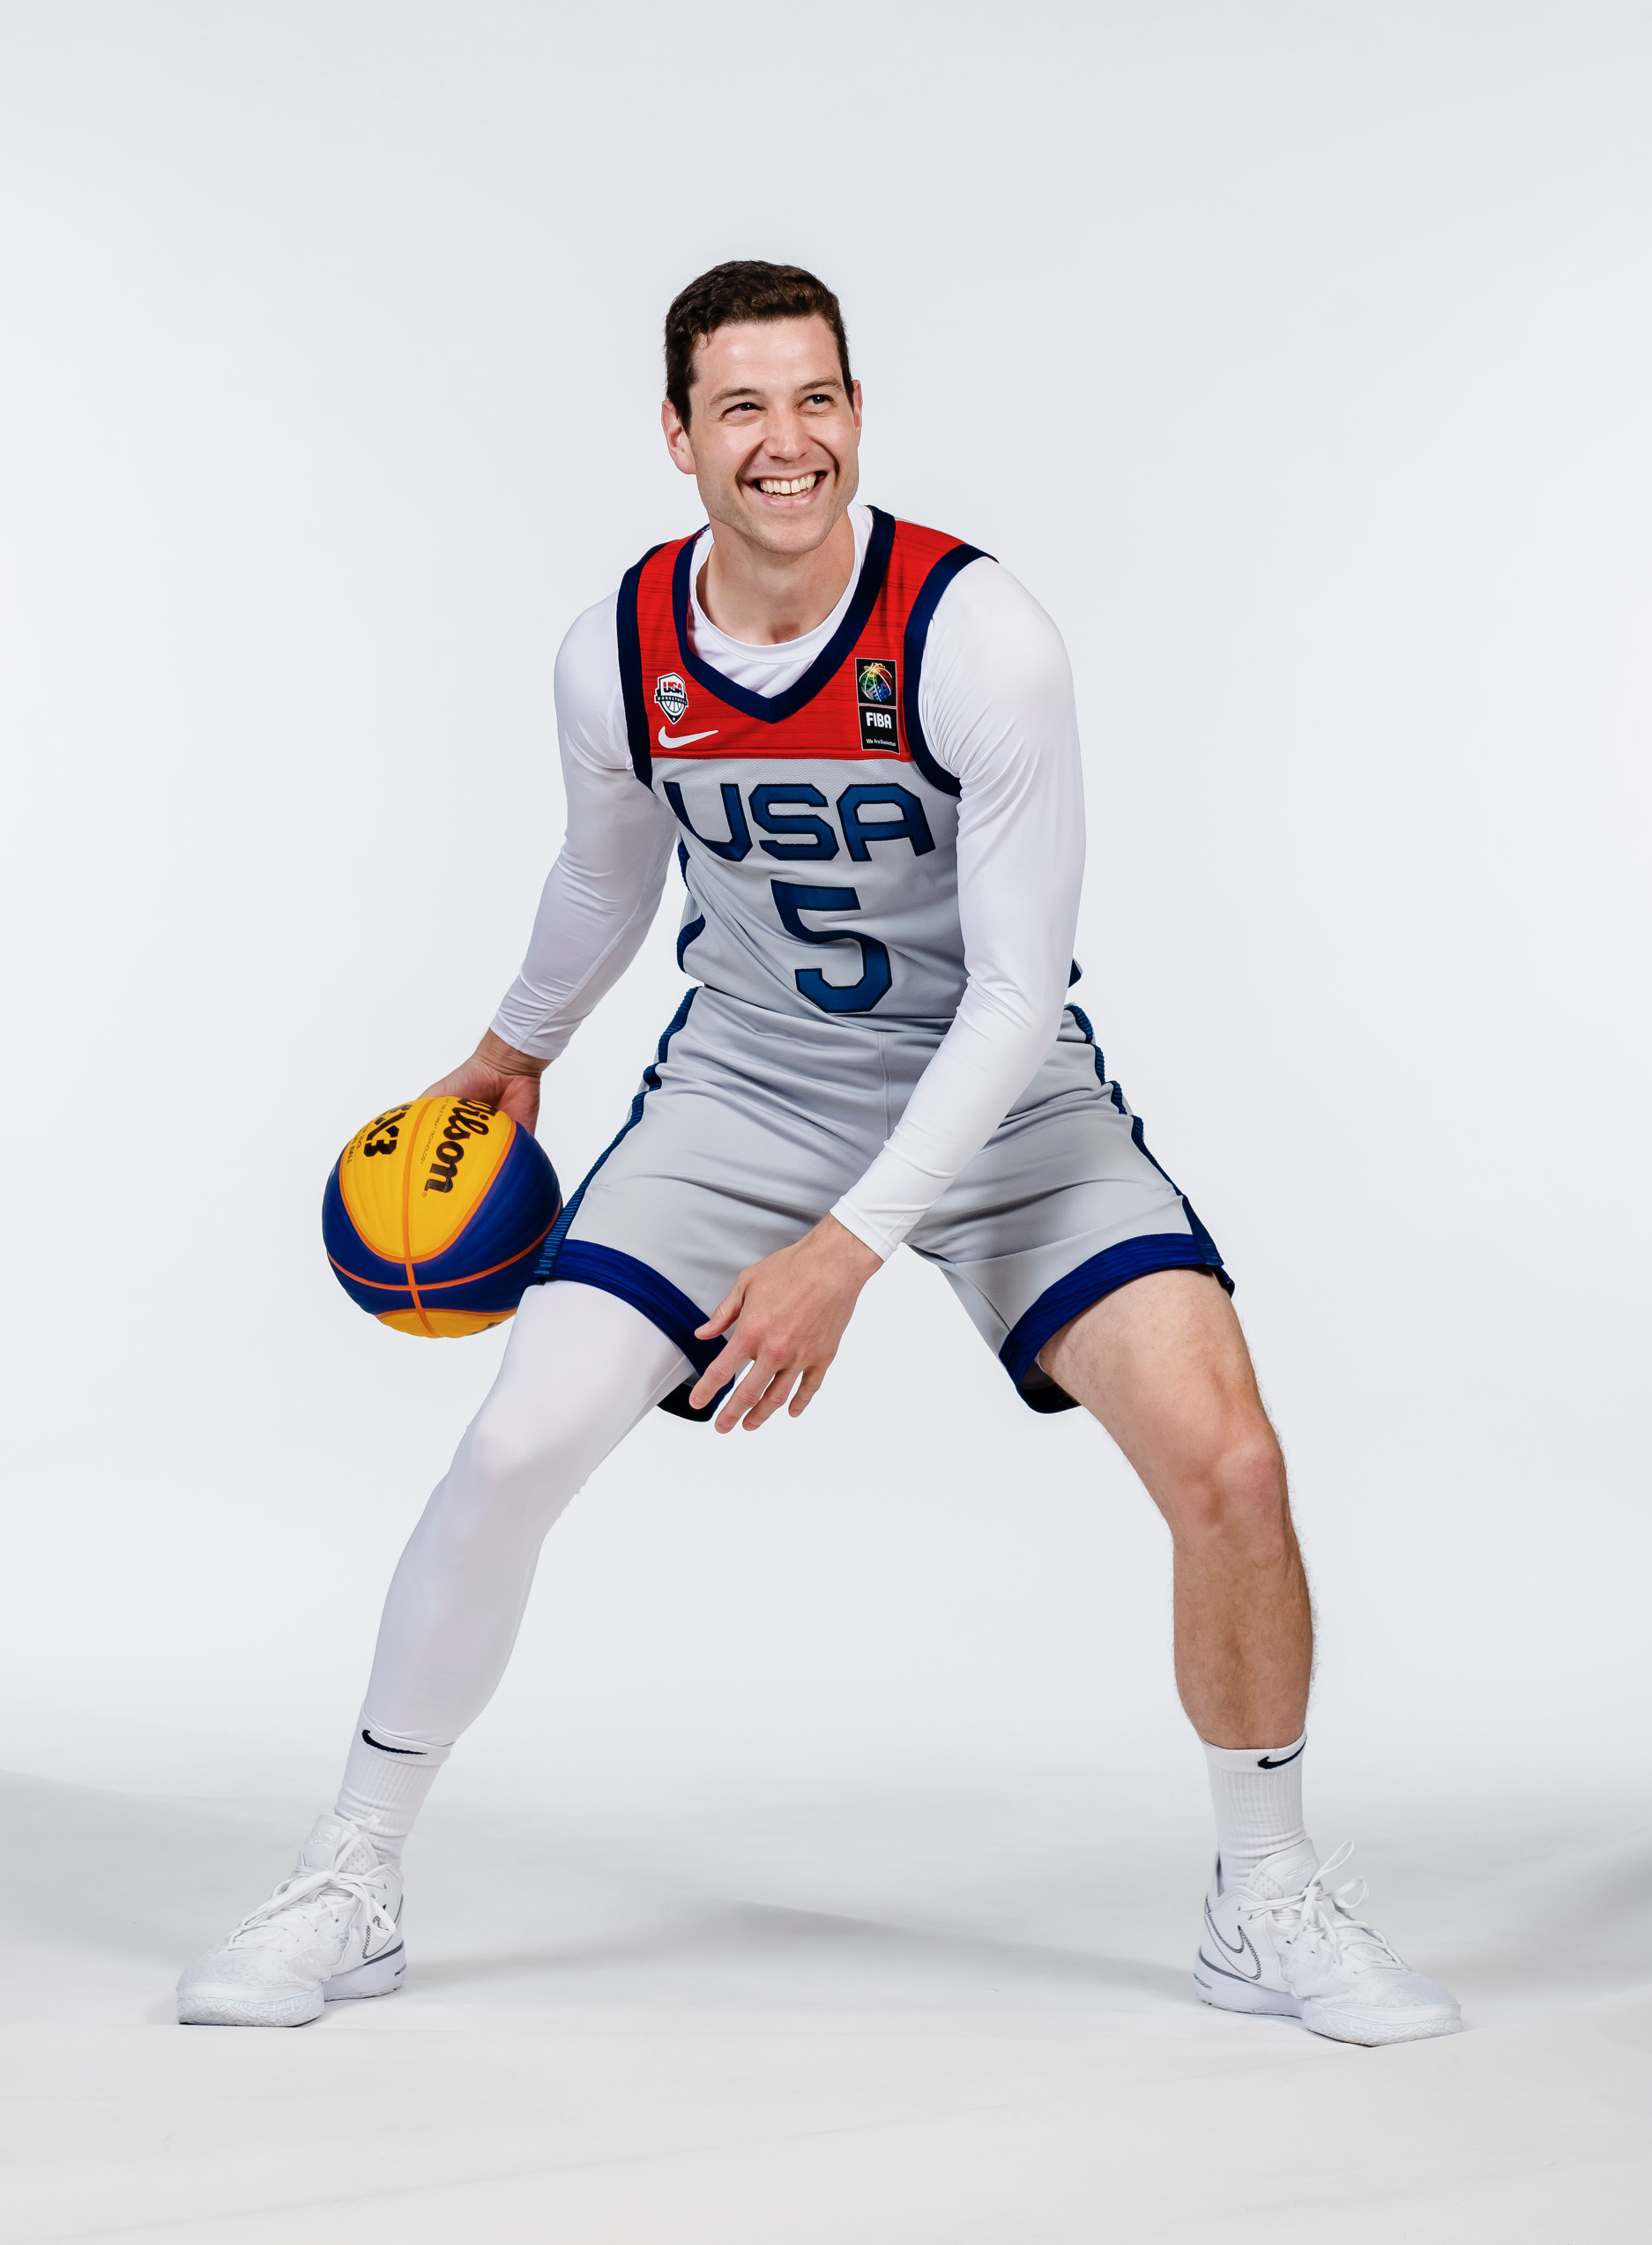 Current Team USA Olympian and Basketball Pro, Jimmer Fredette